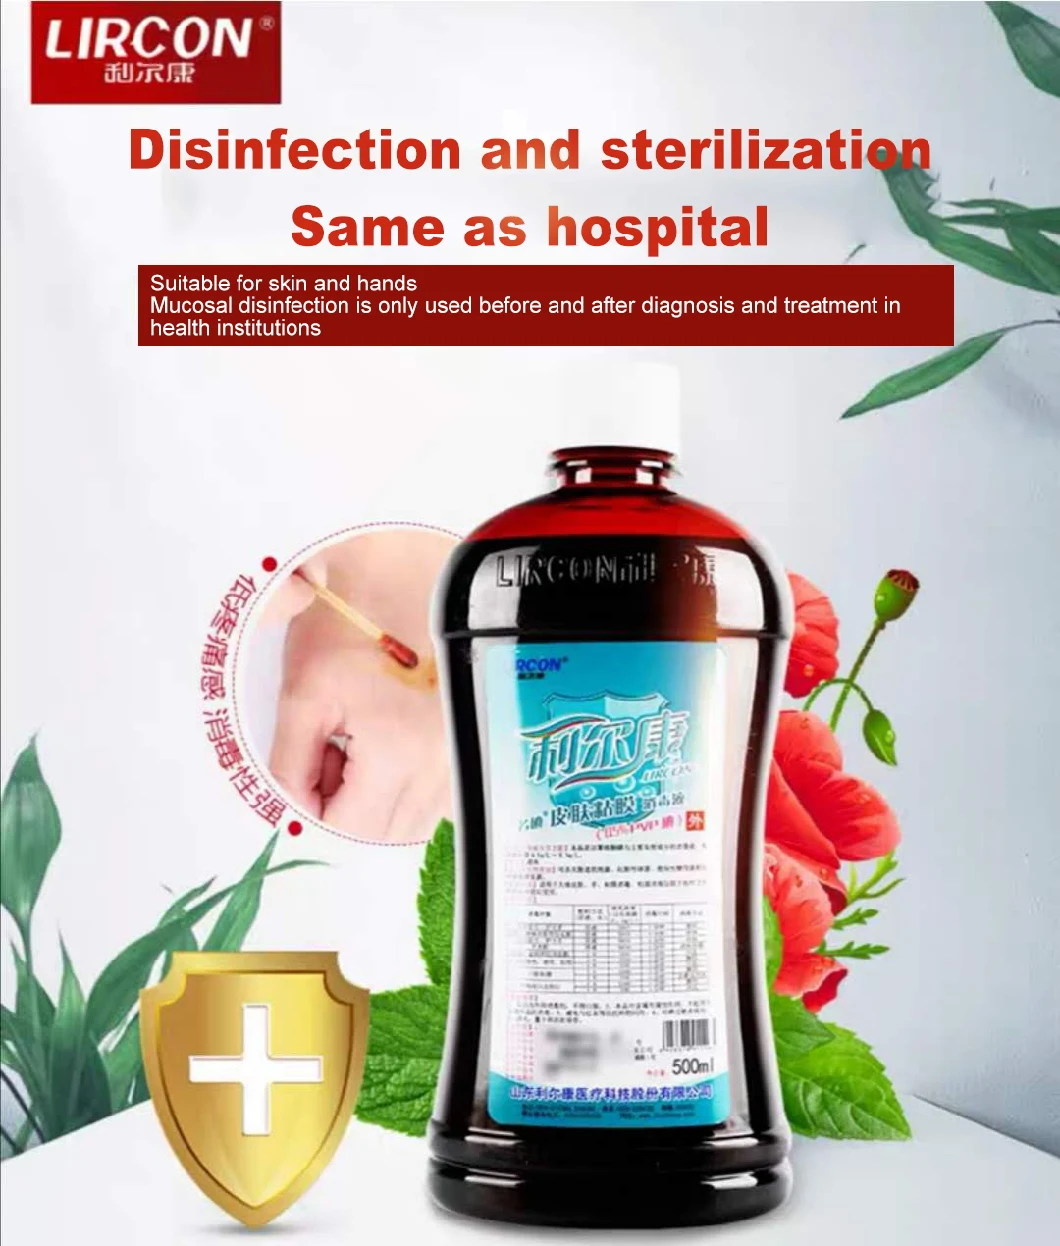 Customizable Povidone Pvp Iodine Disinfectant Solution Kills 99.9% Germs for Wound/Medical Supplies Antiseptic Liquid